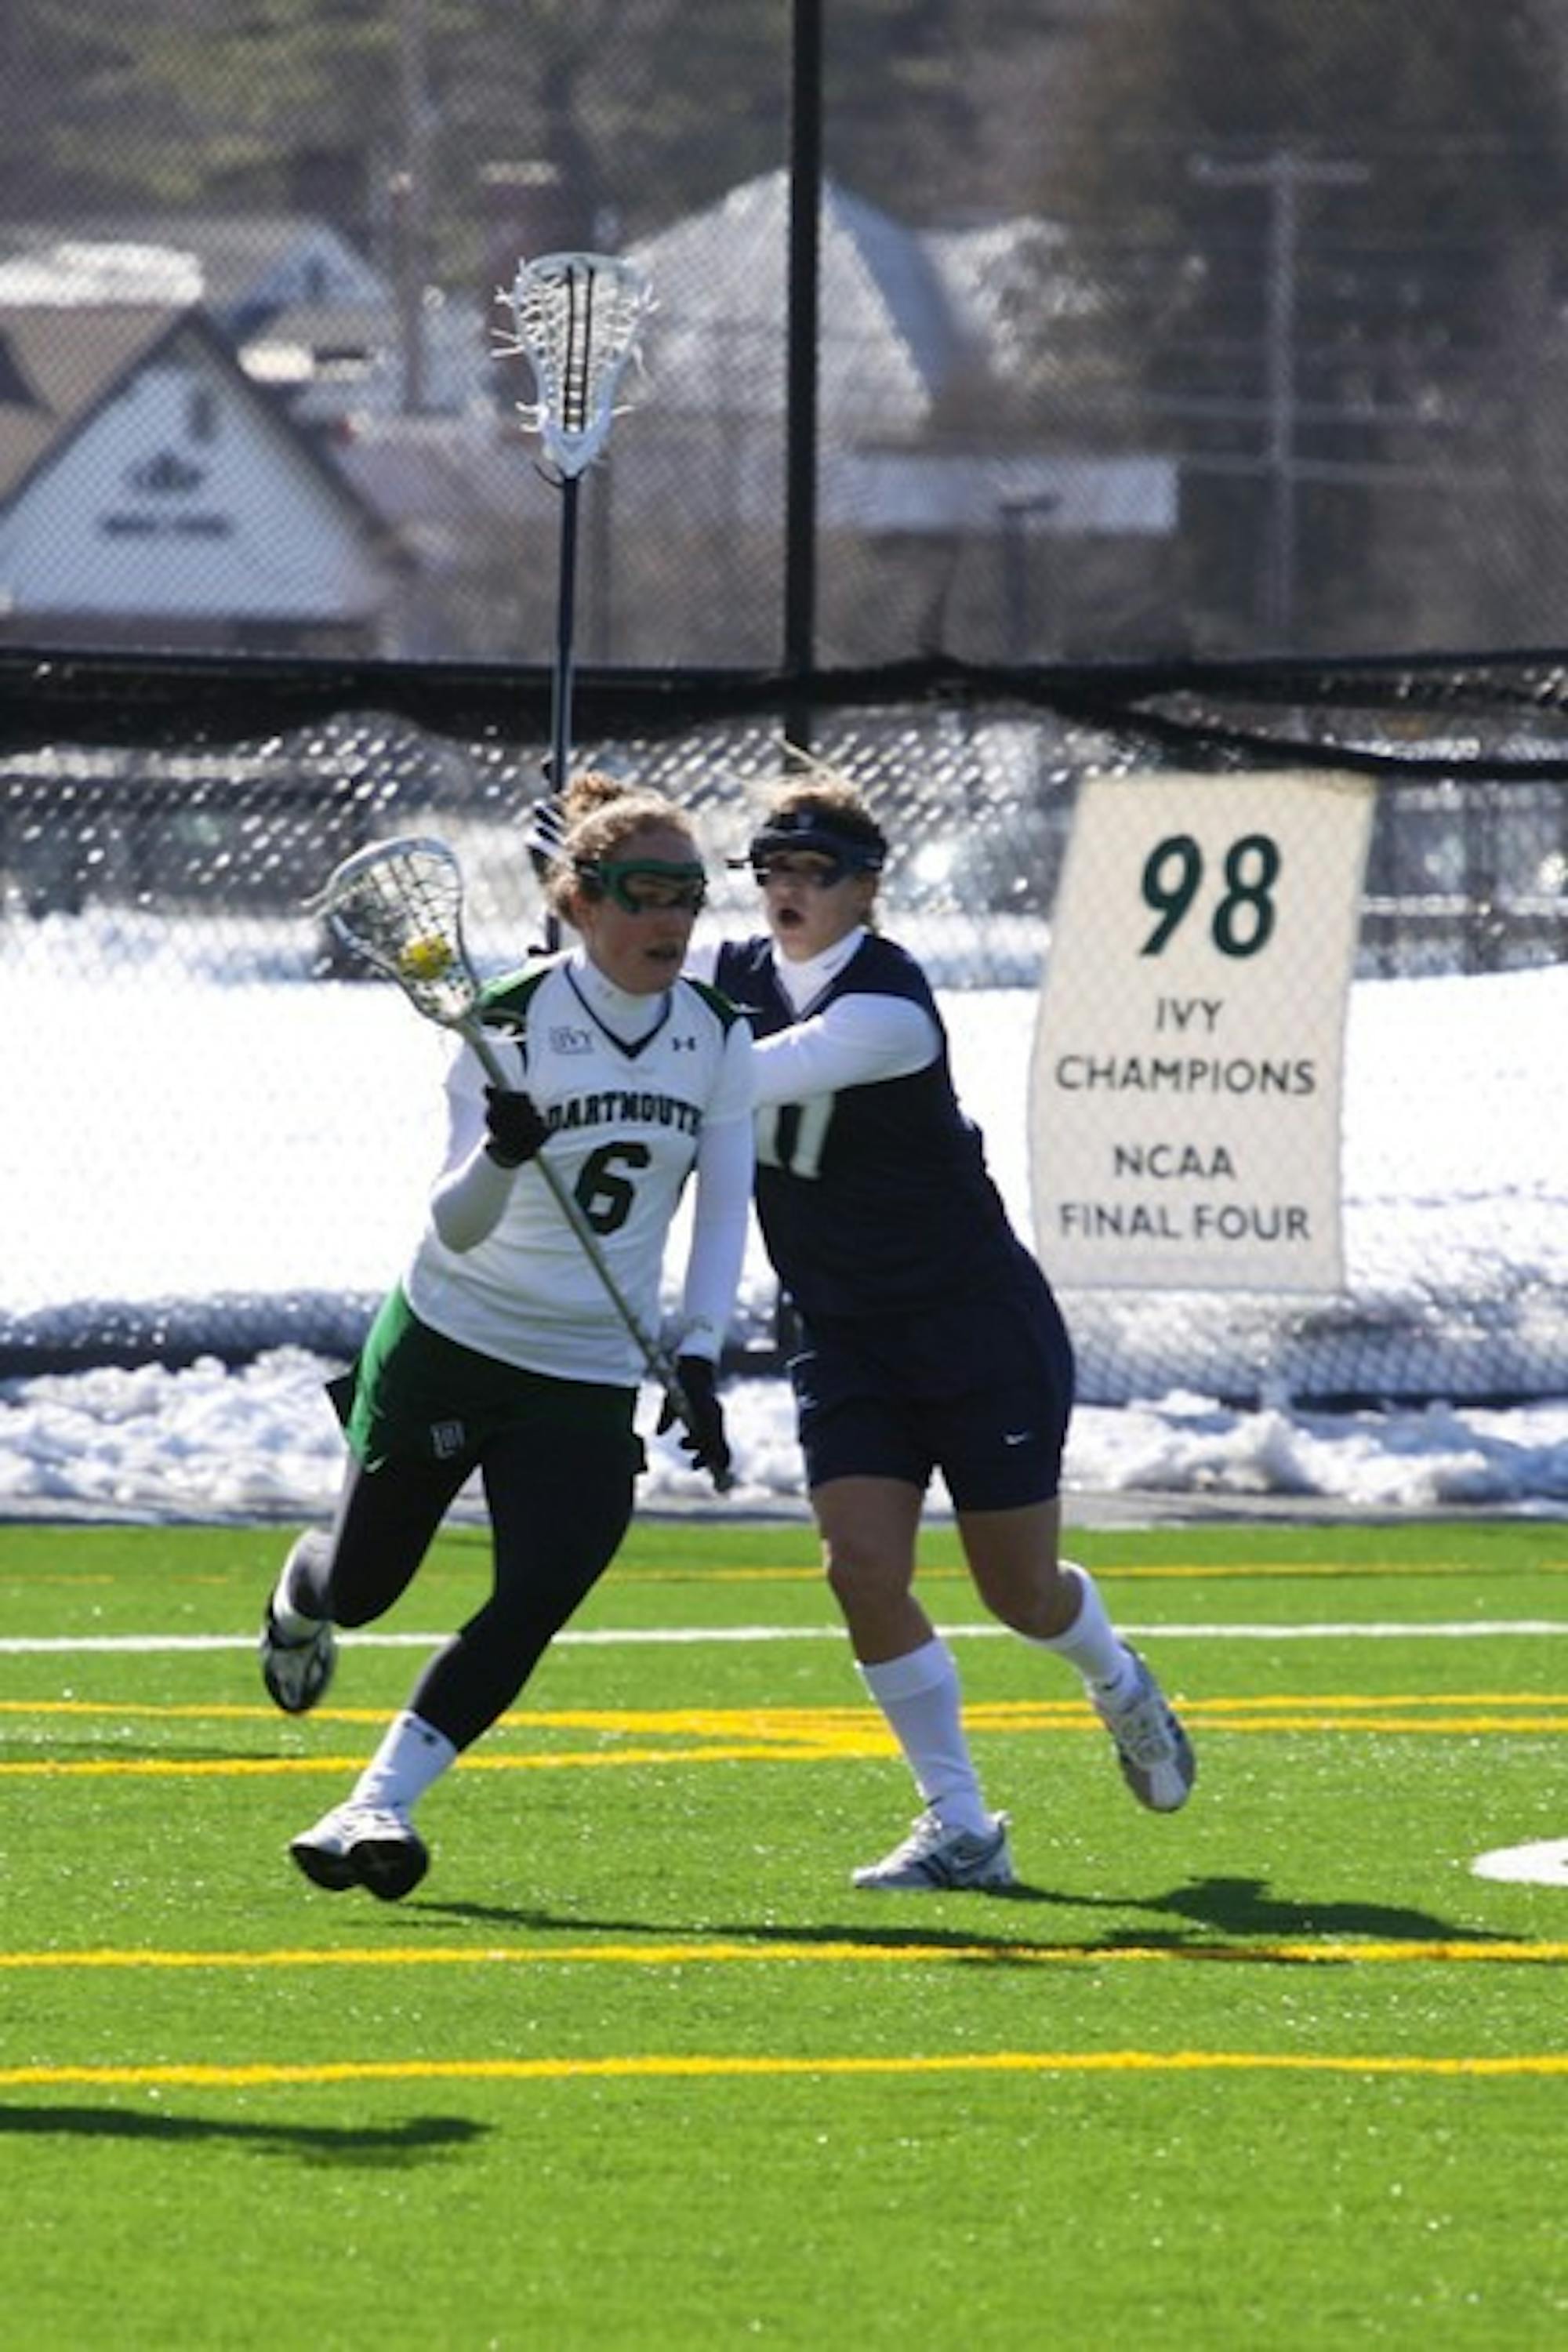 After leading the Fighting Irish 8-5 in the first period, Dartmouth was unable to maintain momentum, falling 16-11.